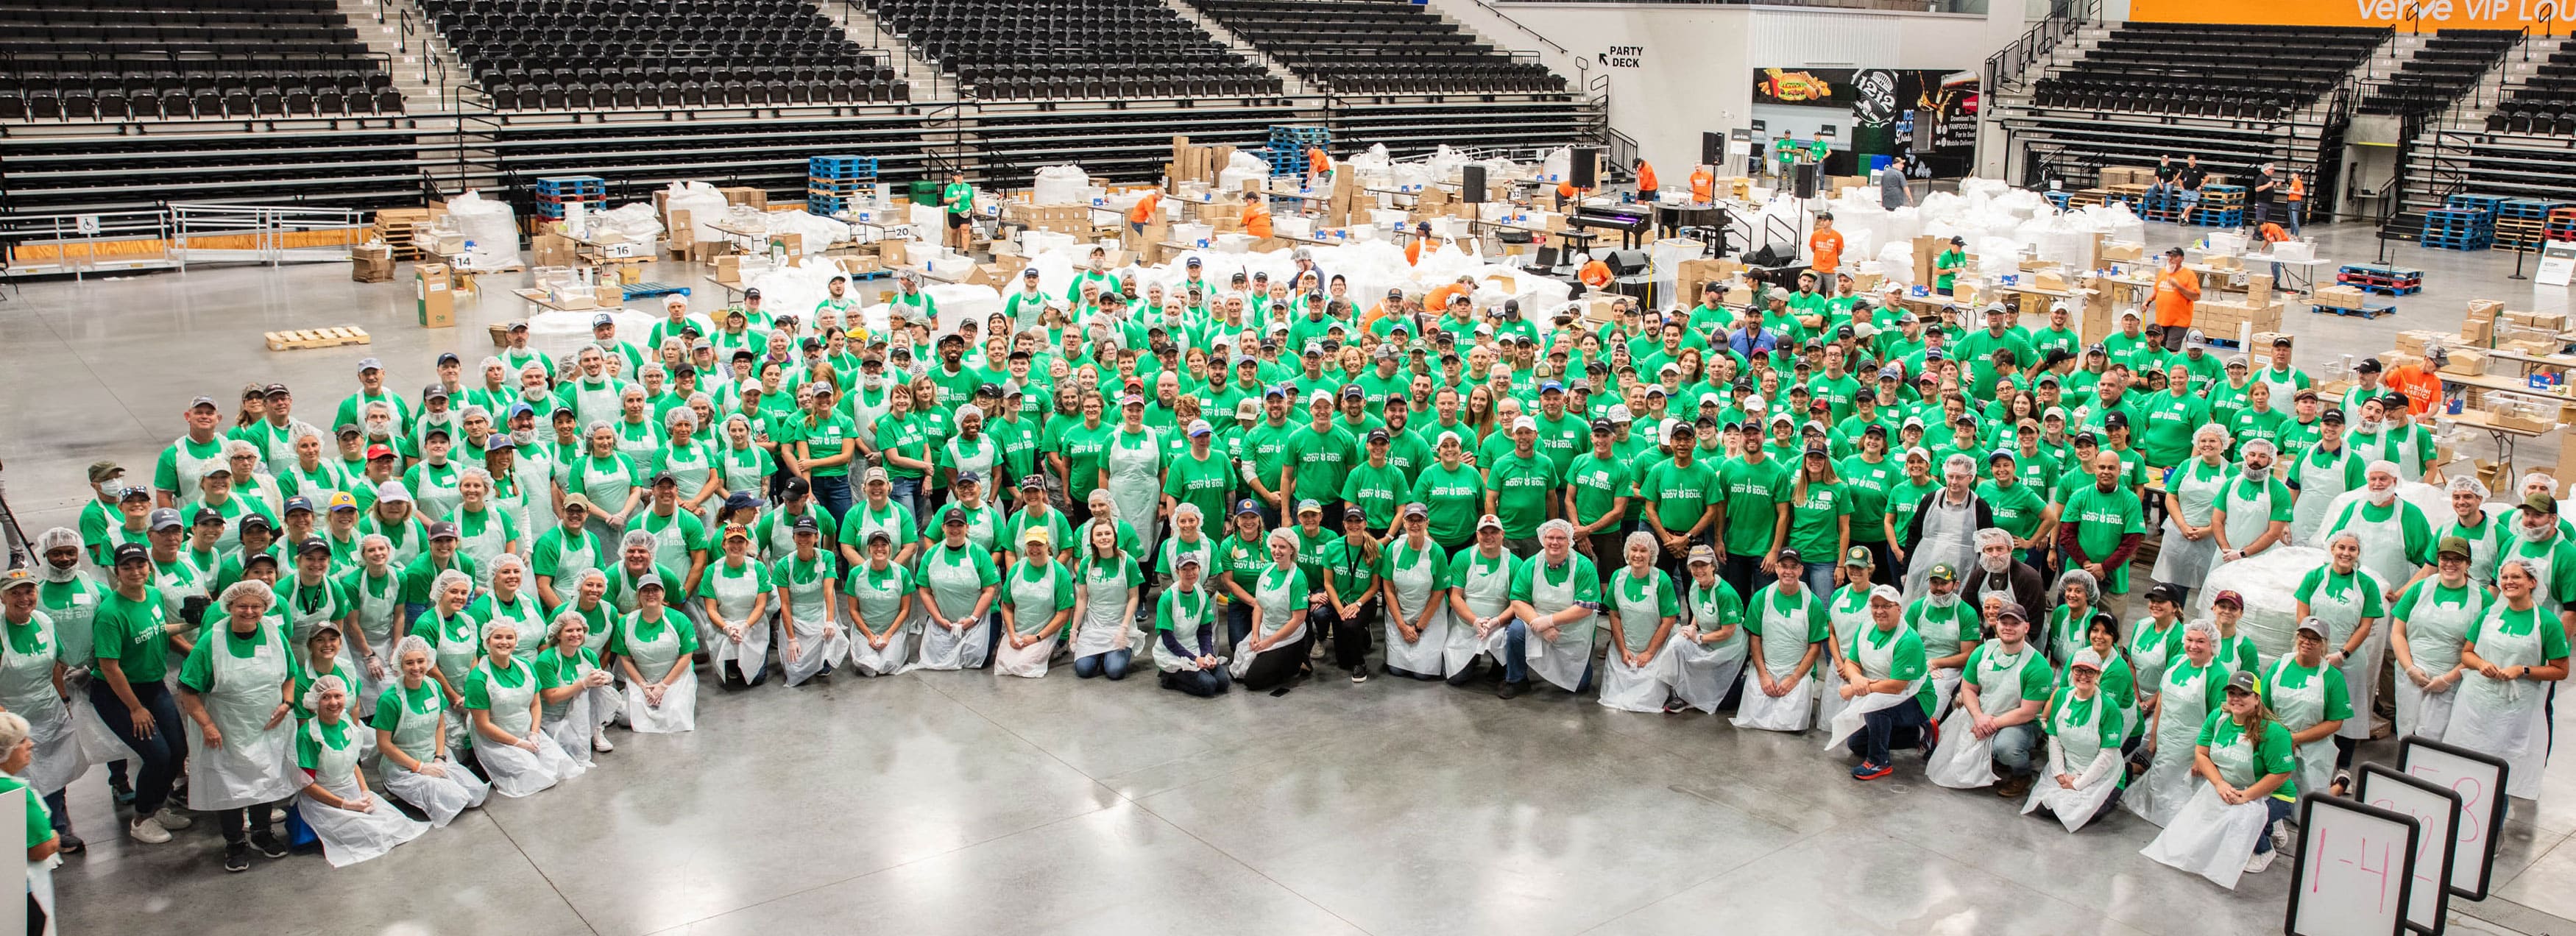 Large group of volunteers wearing green shirts inside a building getting ready to pack rice for Feeding America